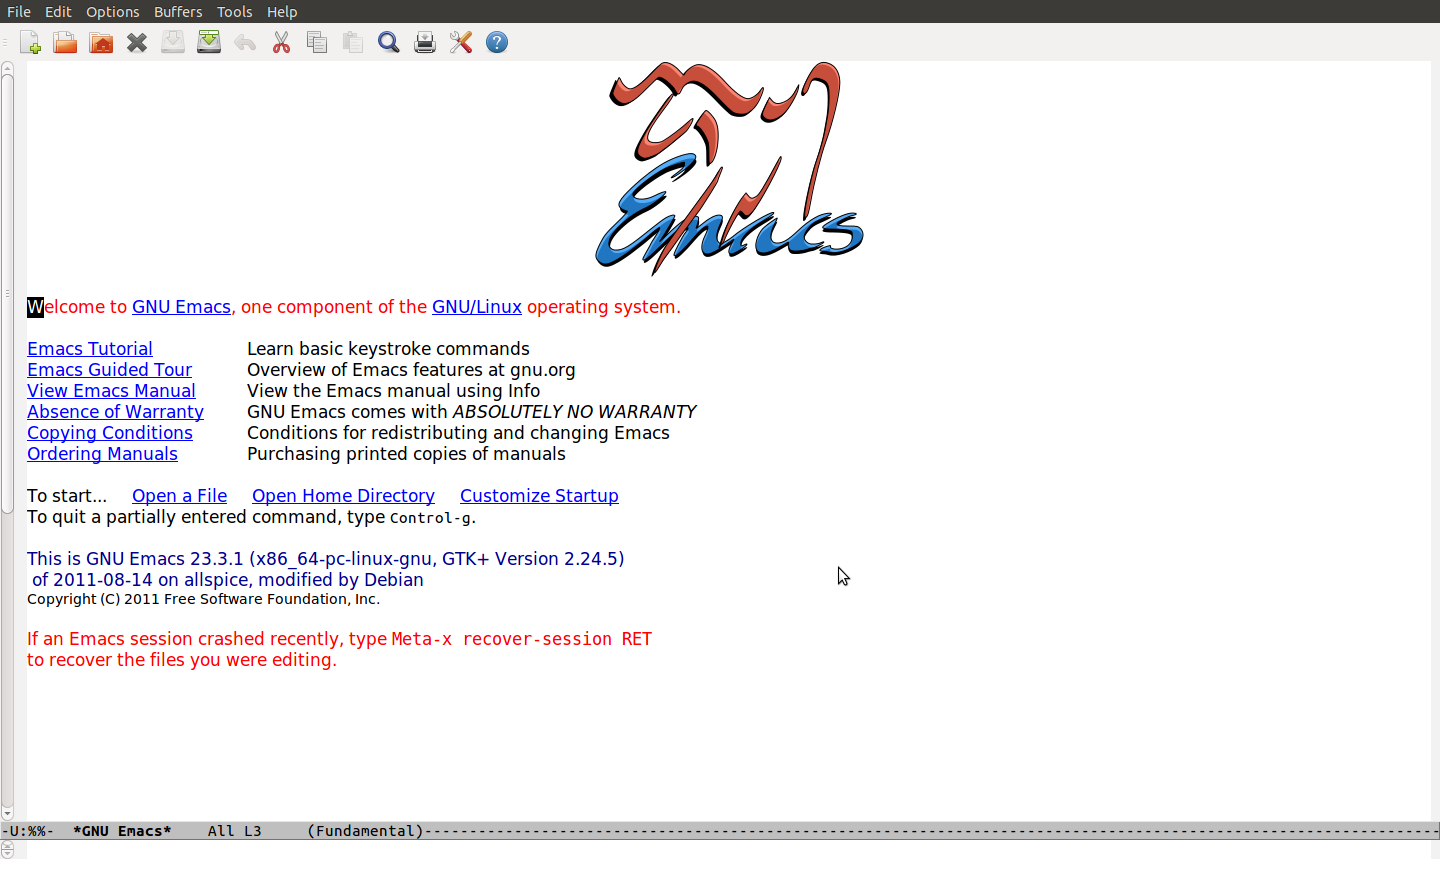 emacs-welcome.png